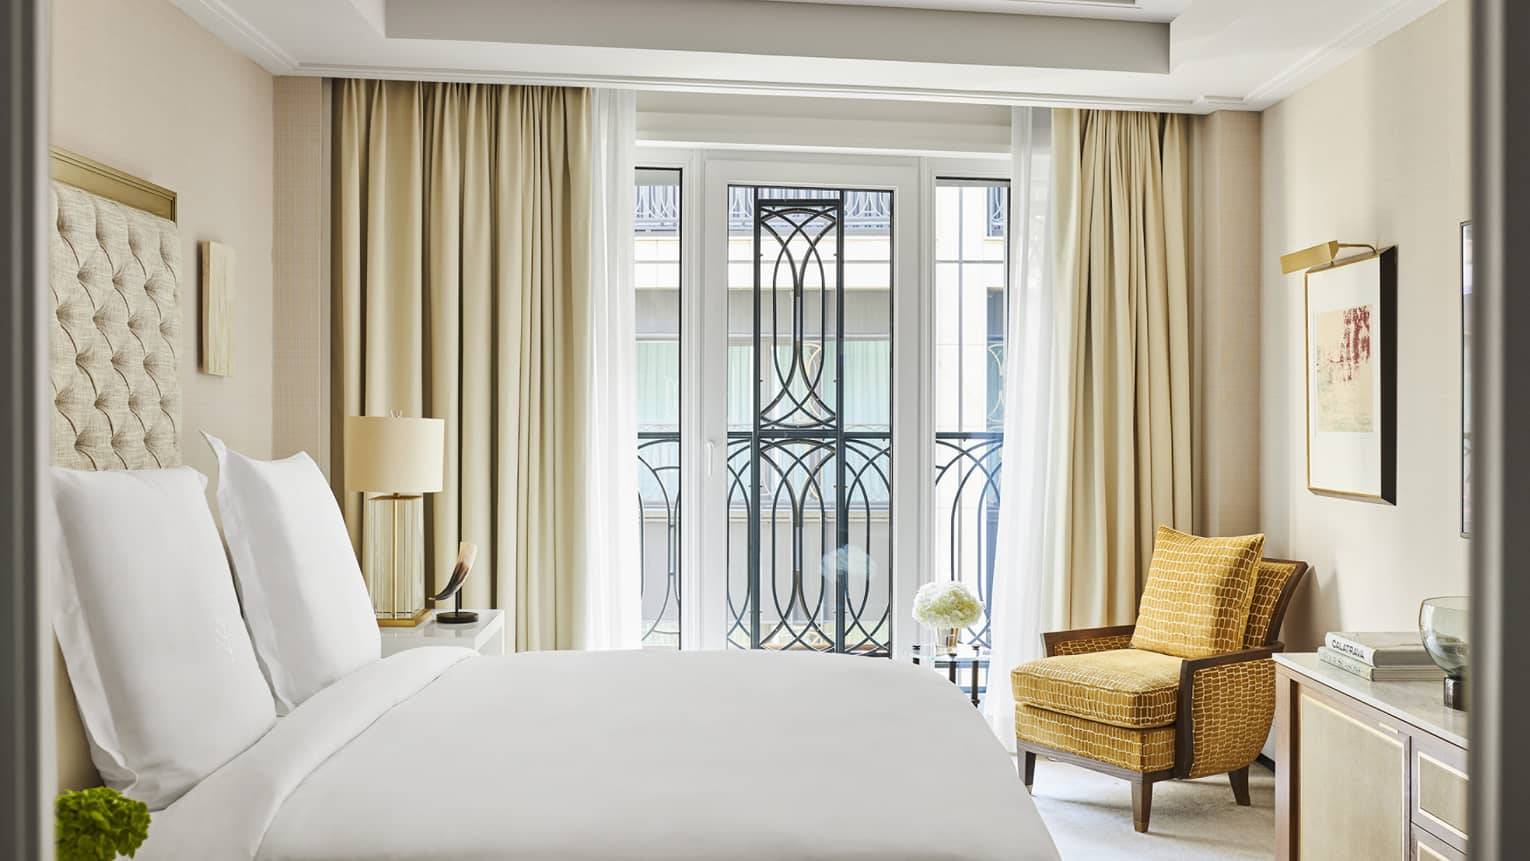 Hotel room with king bed, gold-coloured arm chair and Juliet balcony